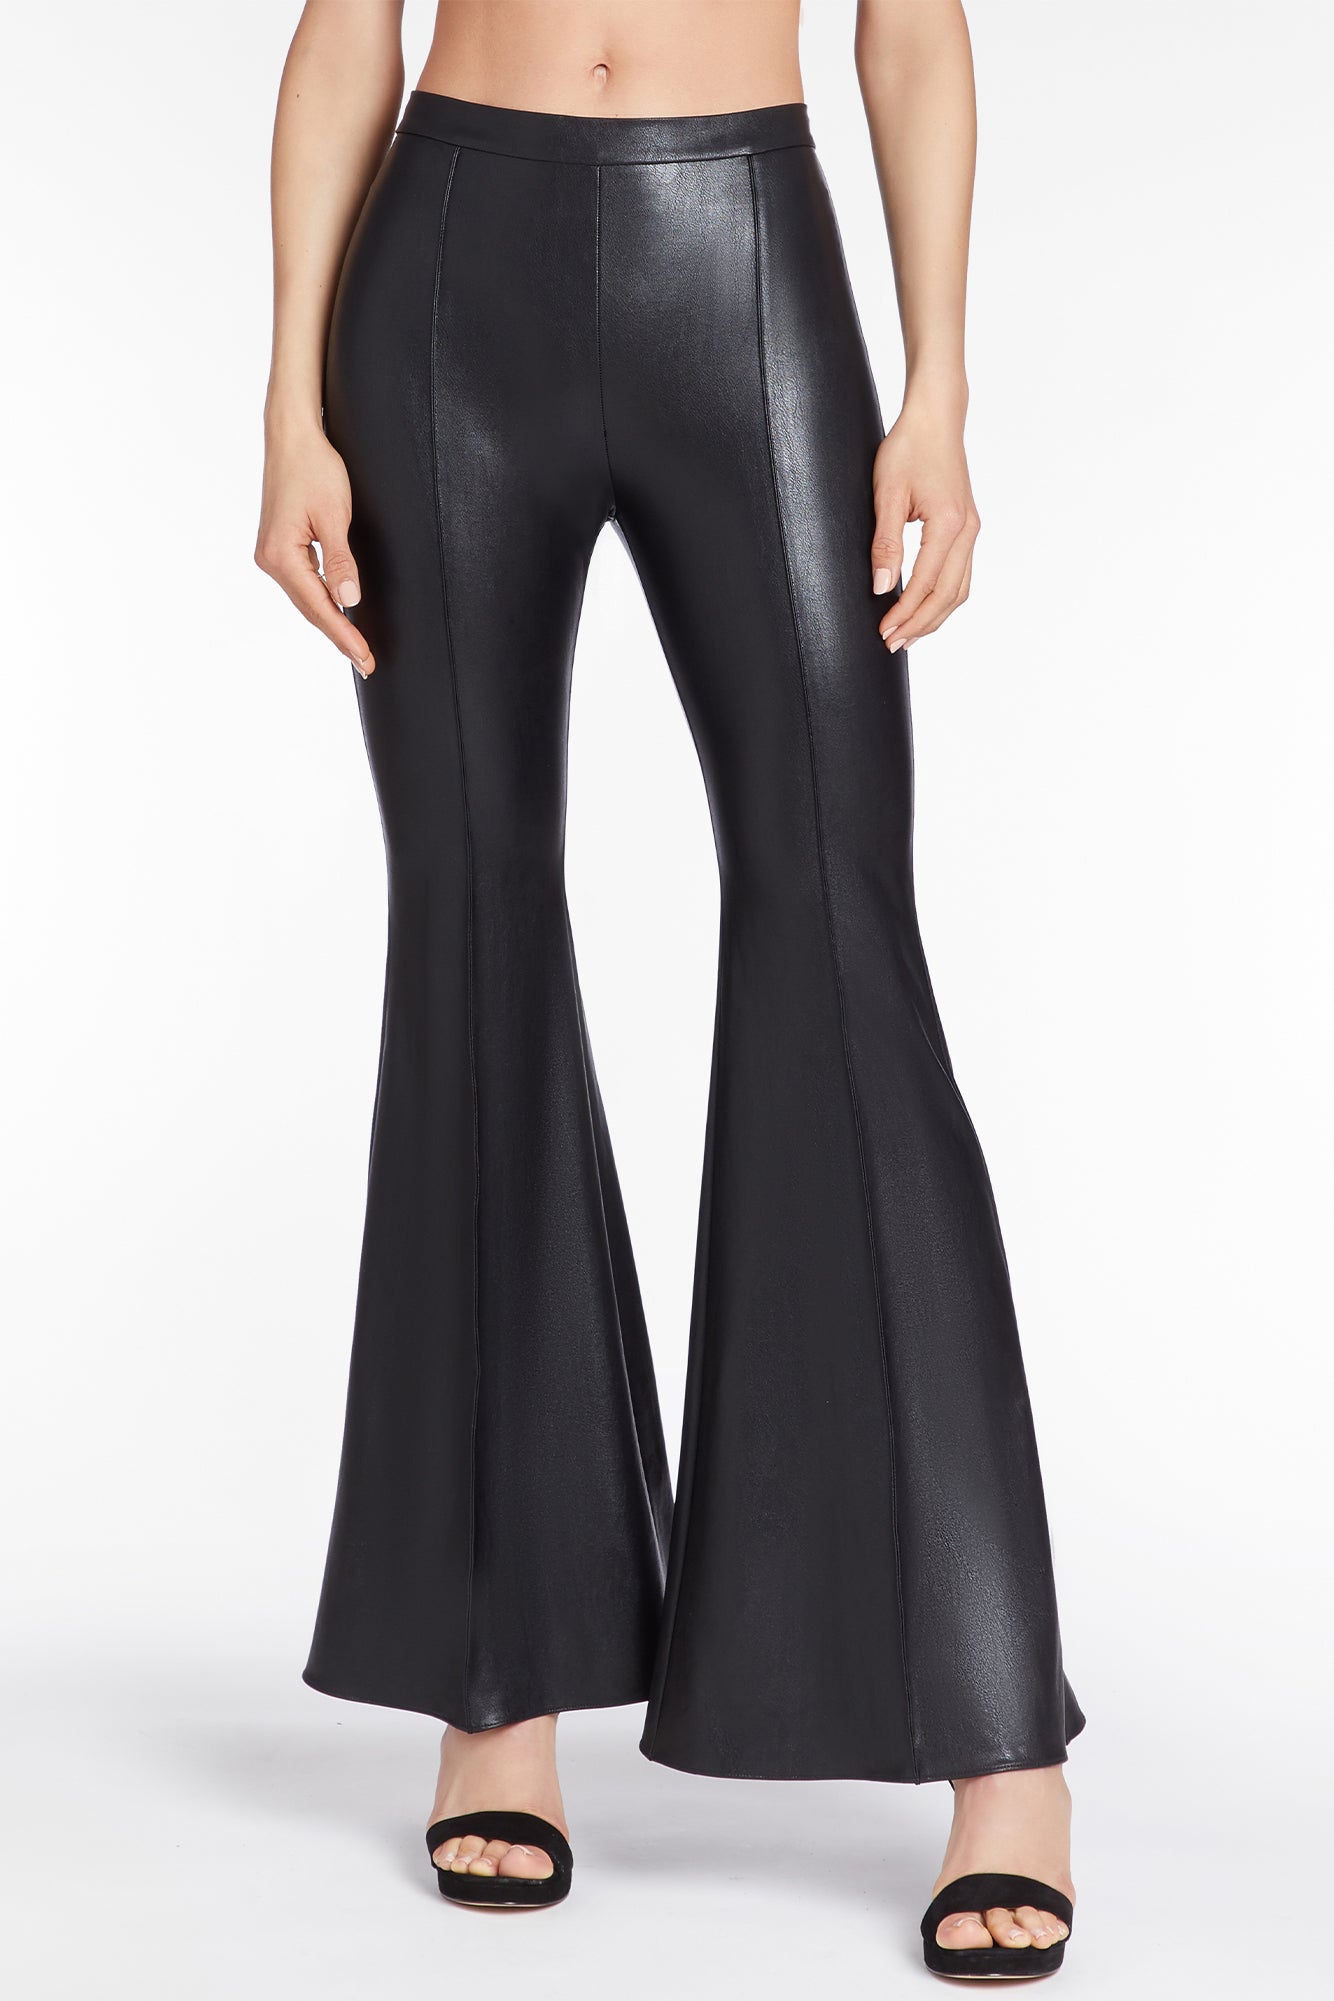 DRESSING DOWN FAUX LEATHER PANTS - Life with A.Co by Amanda L. Conquer